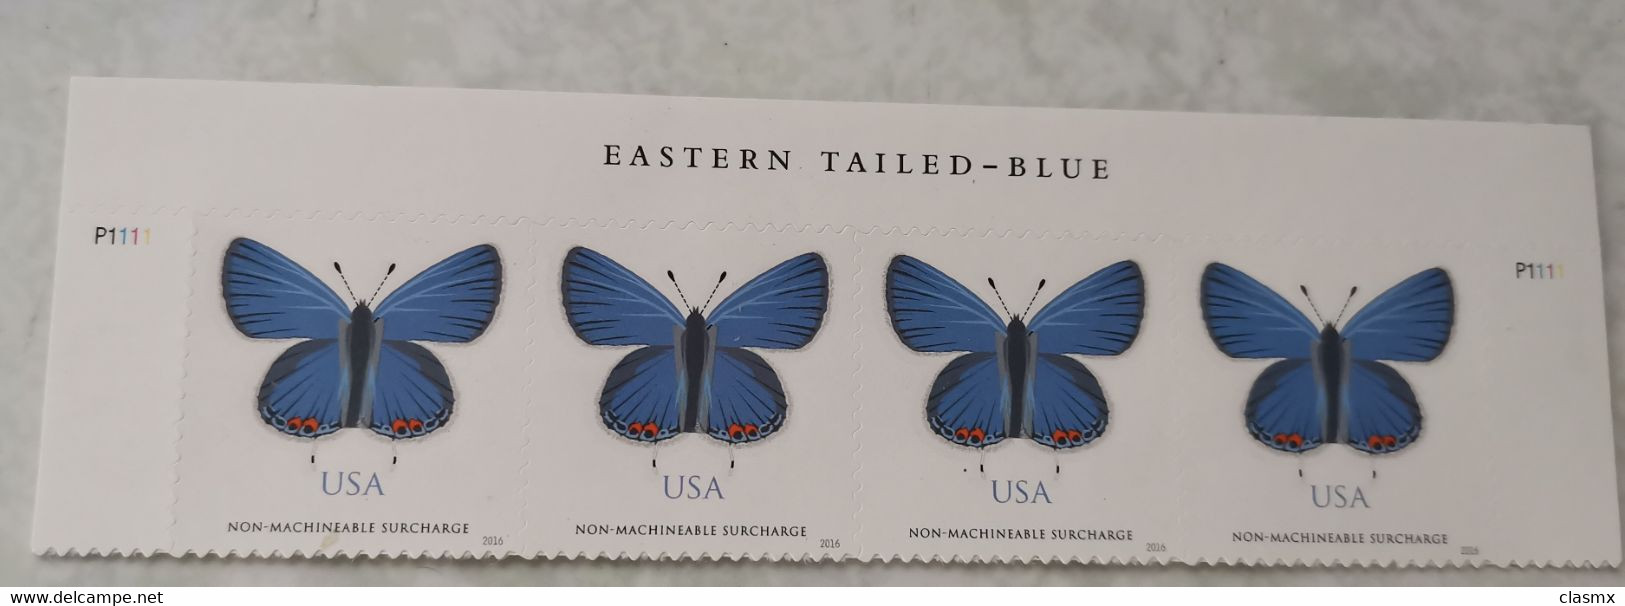 USA Blue Butterflies STAMPS MNH EASTERN TILED BLUE - Nuevos